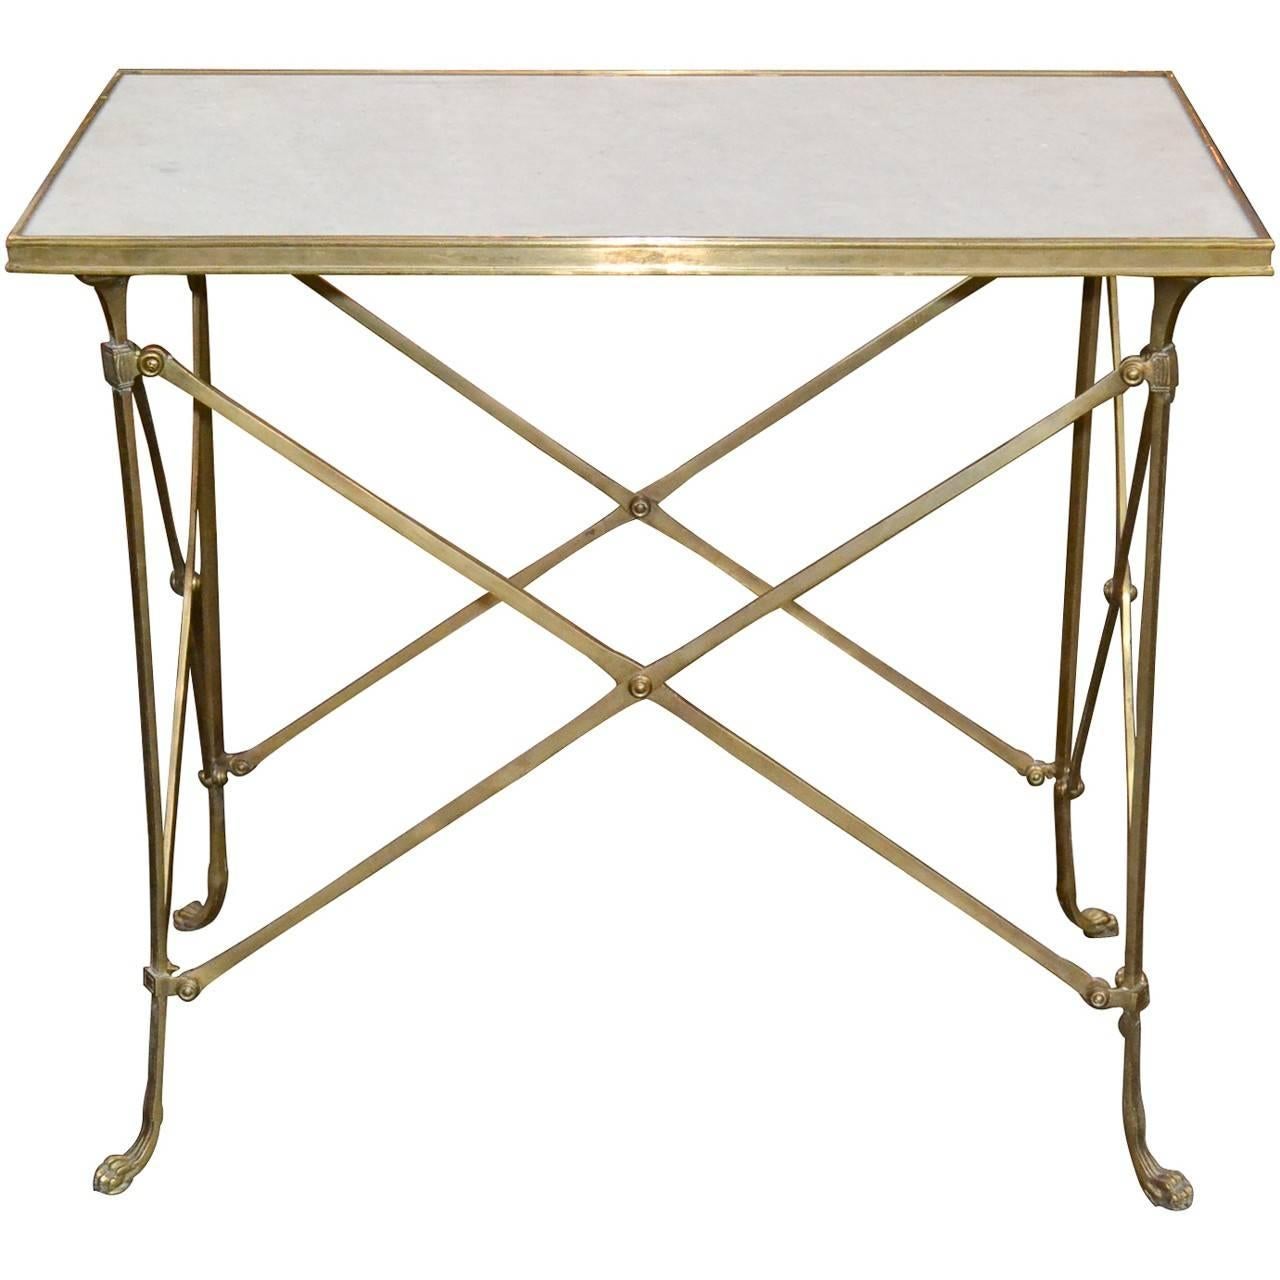 Midcentury French Directoire Gilt Bronze Table